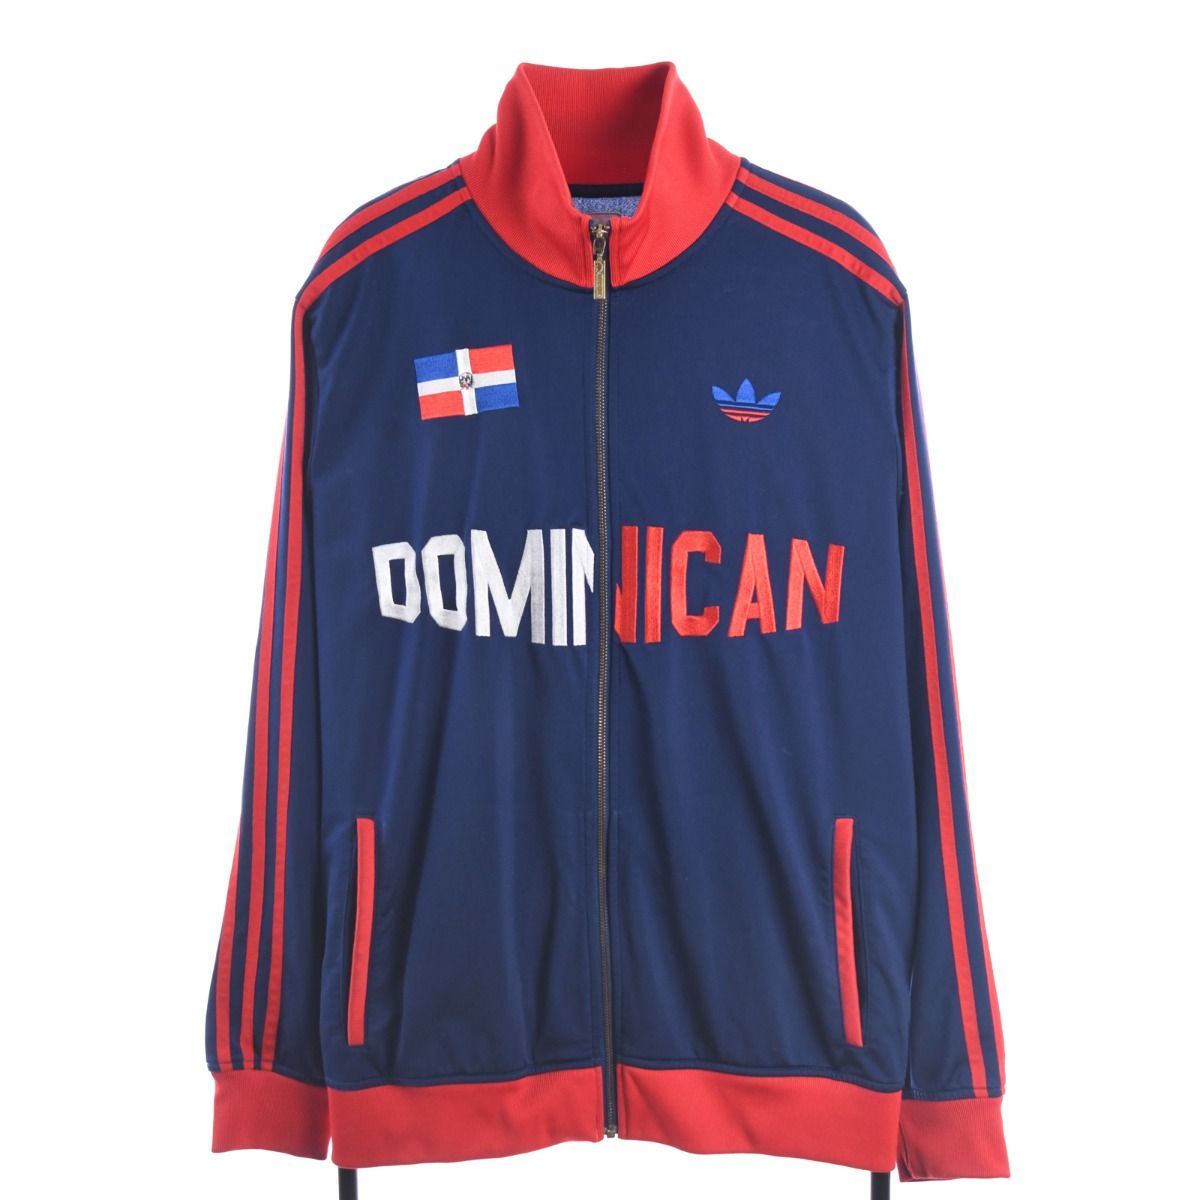 Adidas Early 2000s Dominican Track Jacket